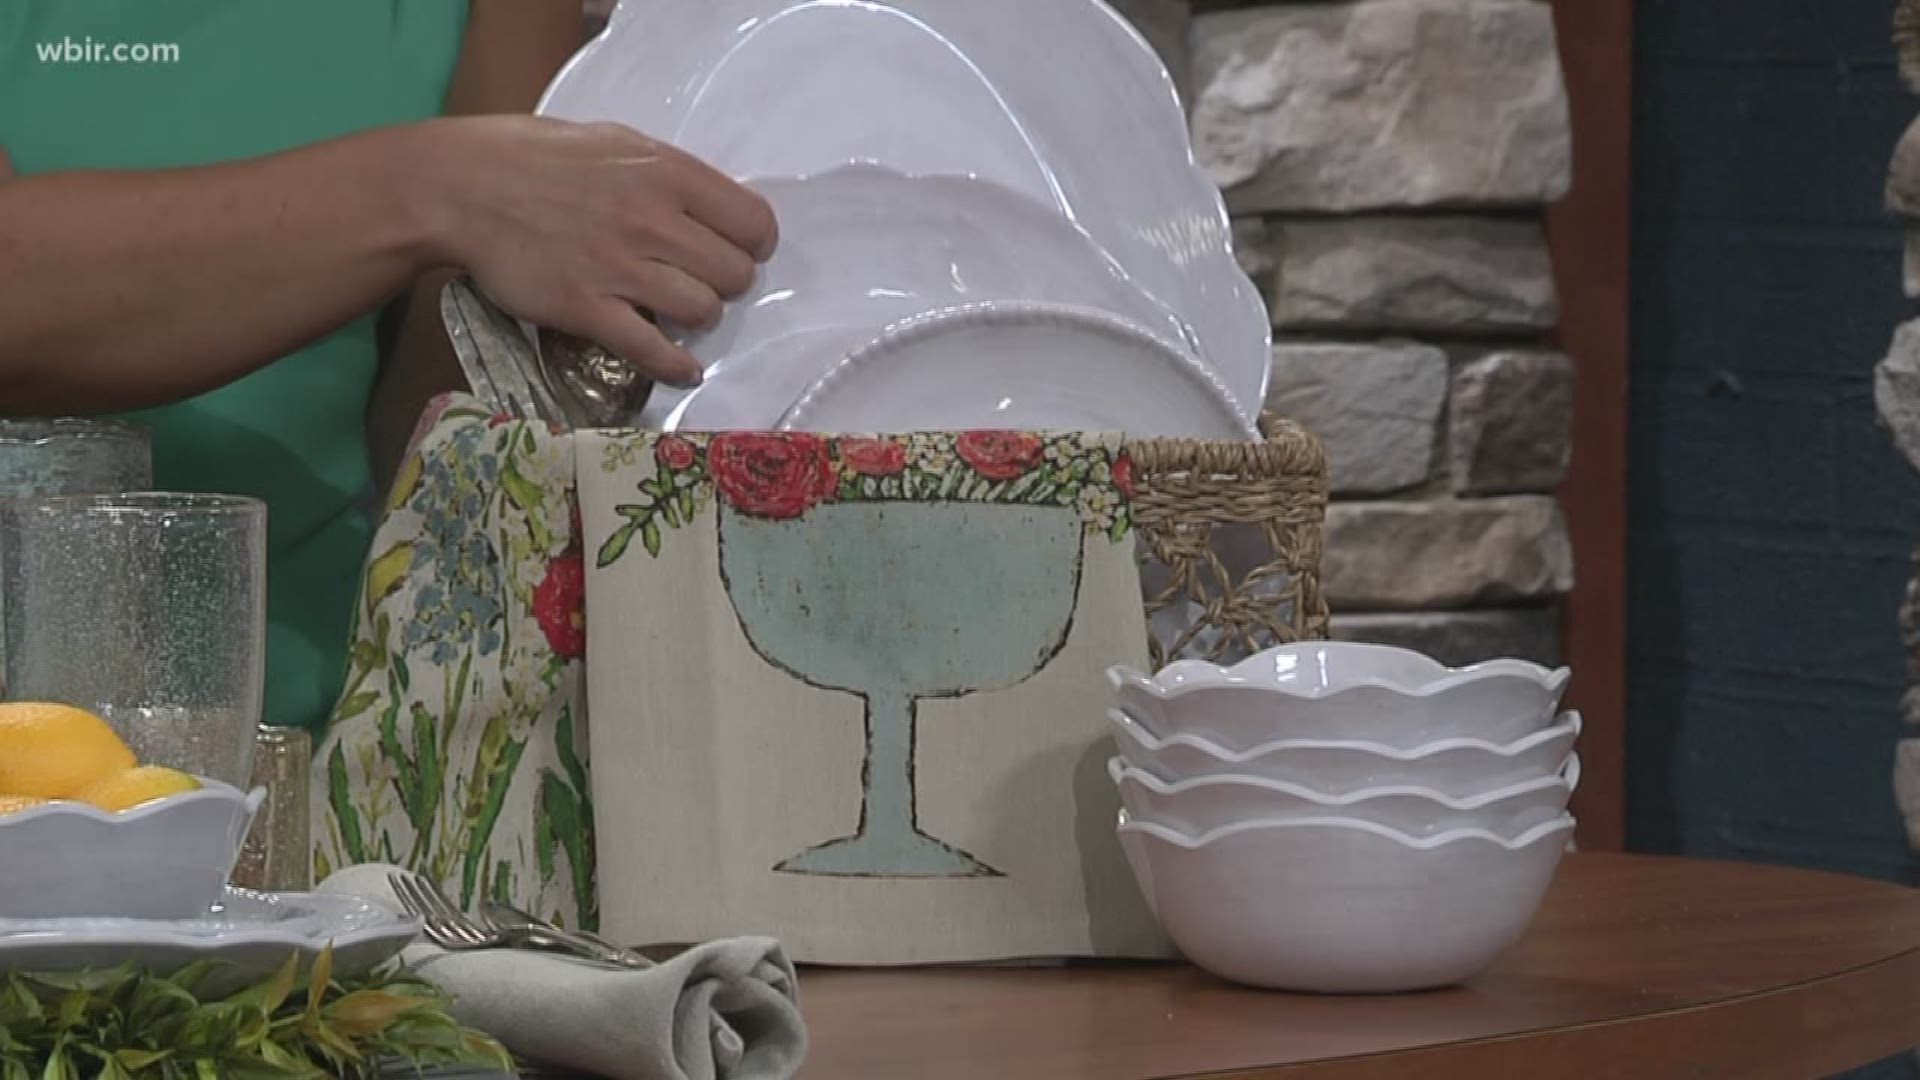 Back Porch Mercantile shares how to host an outdoor dinner party.